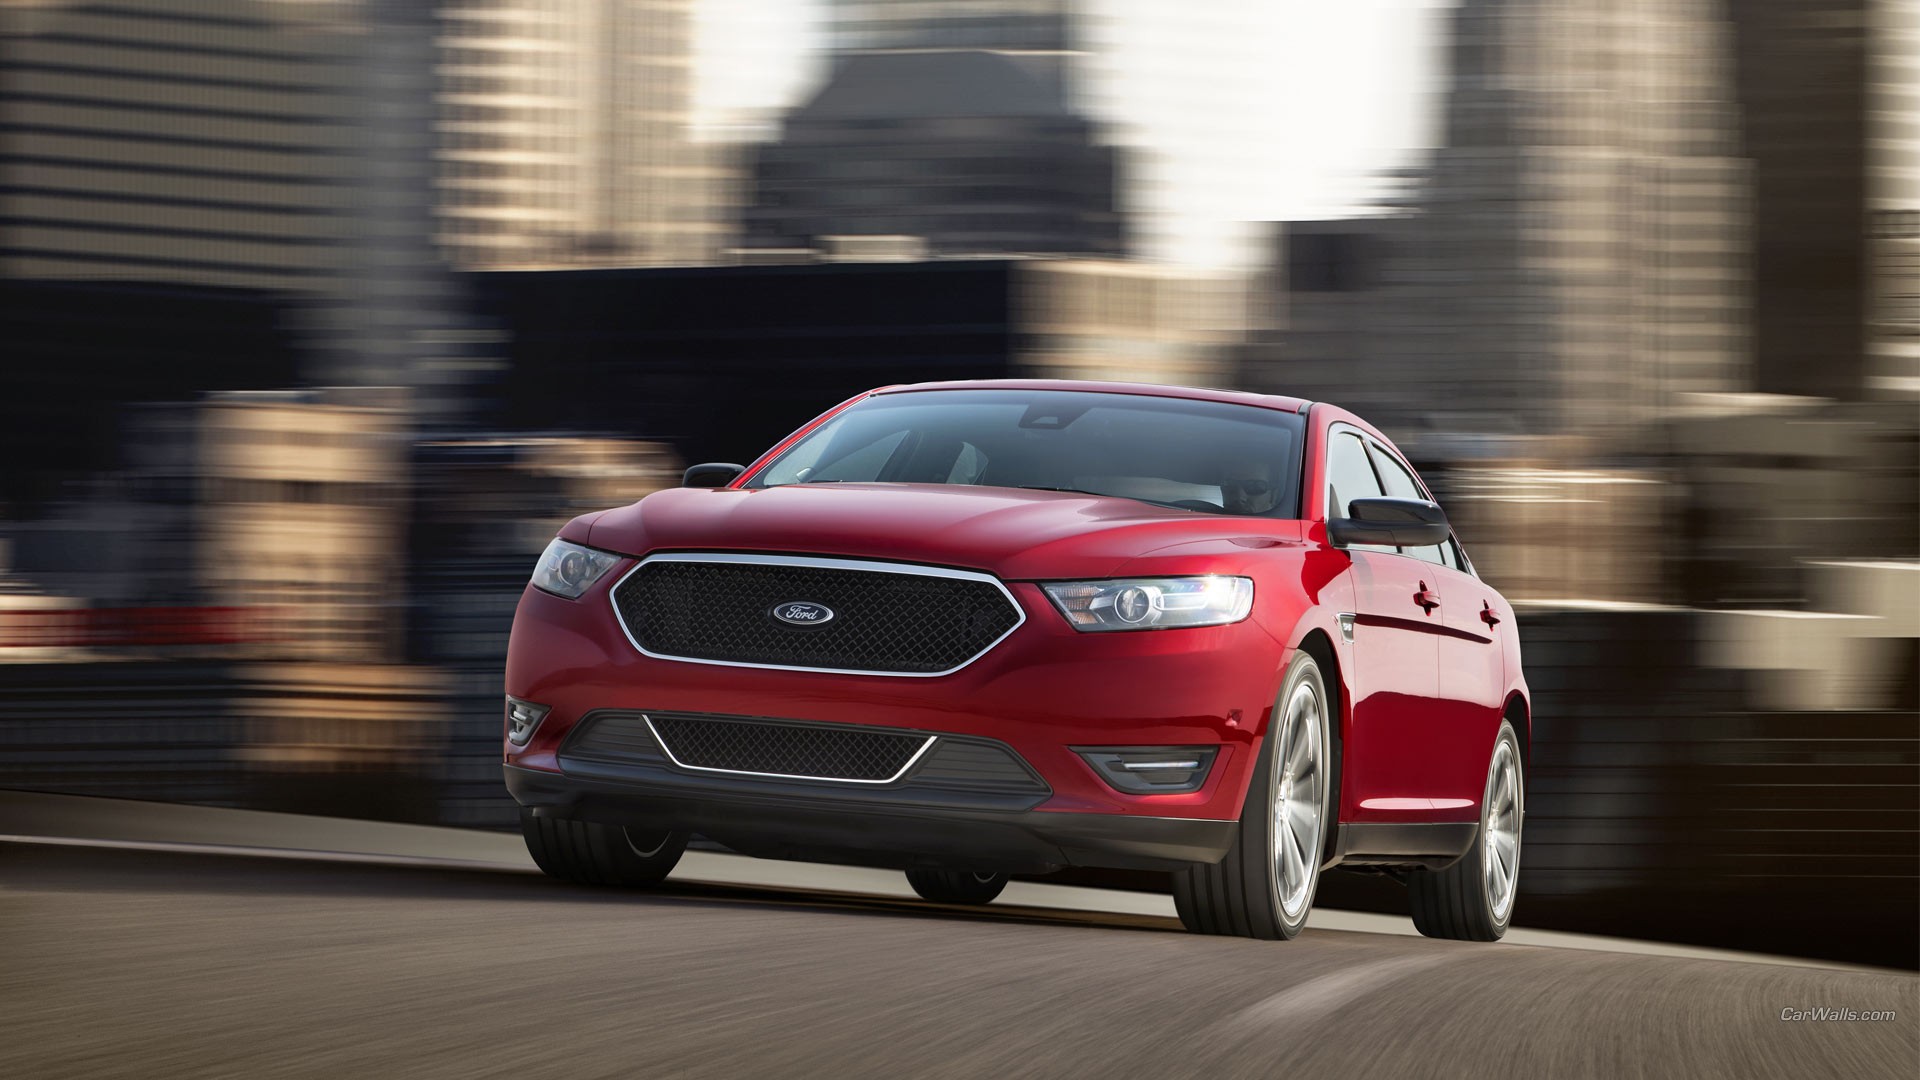 Ford Taurus Ford Road Red Cars Vehicle Car 1920x1080